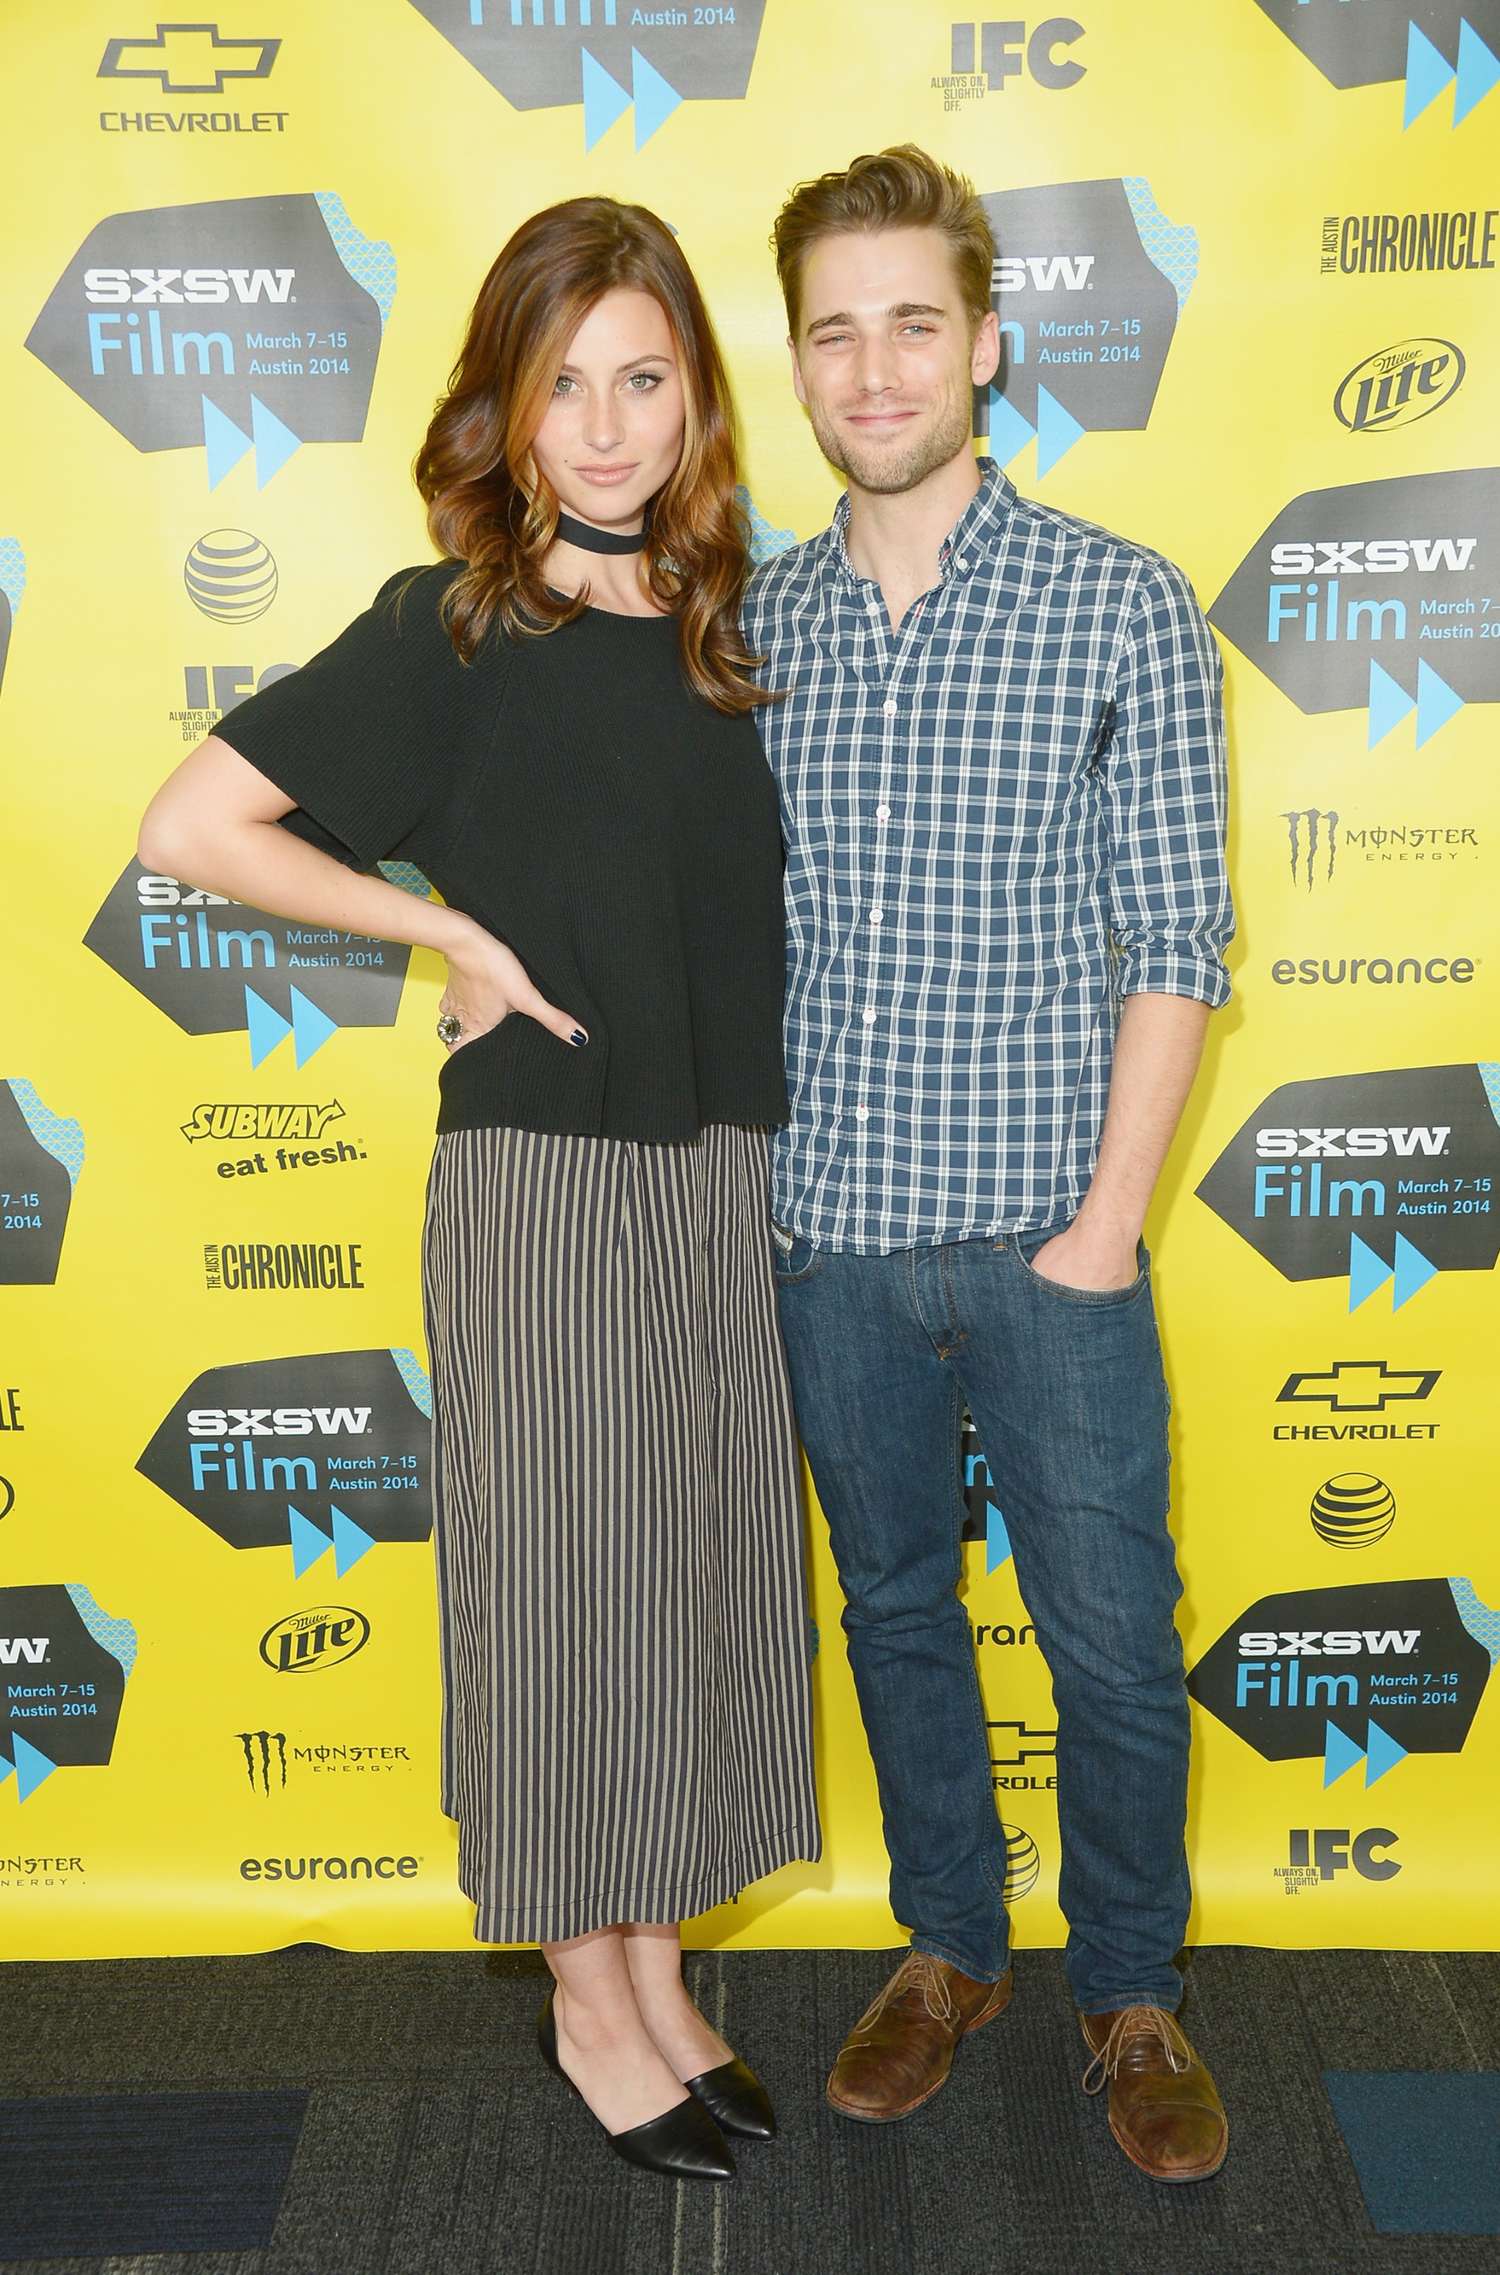 Alyson Aly Michalka Sequoia Official Photo Op And QA at SXSW in Austin